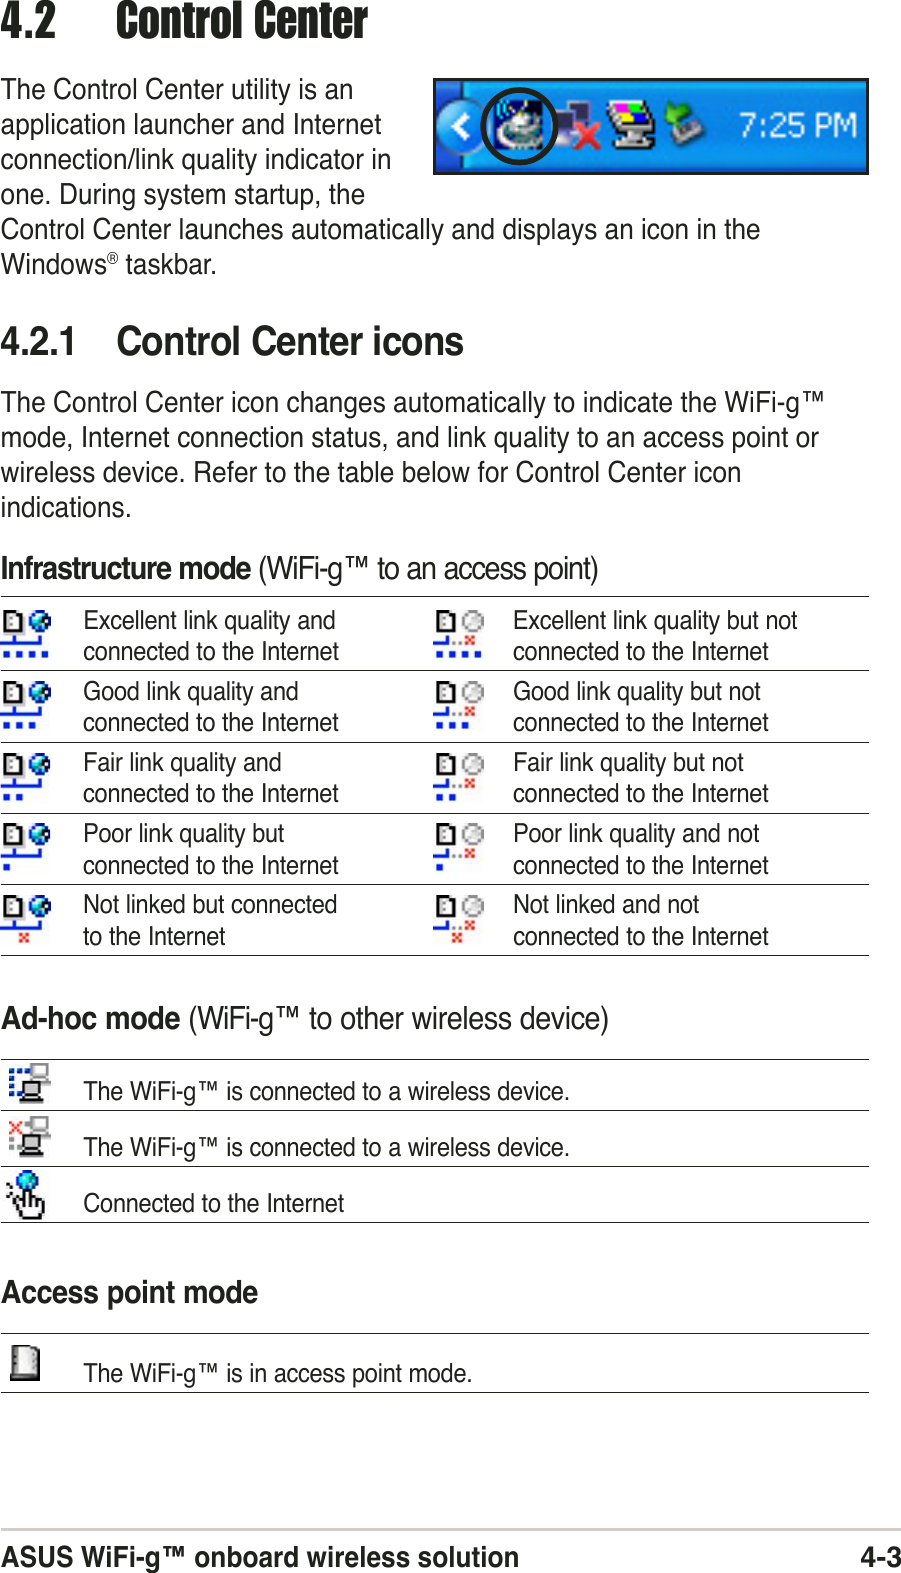 ASUS WiFi-g™ onboard wireless solution4-34.2 Control CenterThe Control Center utility is anapplication launcher and Internetconnection/link quality indicator inone. During system startup, theControl Center launches automatically and displays an icon in theWindows® taskbar.Ad-hoc mode (WiFi-g™ to other wireless device)The WiFi-g™ is connected to a wireless device.The WiFi-g™ is connected to a wireless device.Connected to the Internet4.2.1 Control Center iconsThe Control Center icon changes automatically to indicate the WiFi-g™mode, Internet connection status, and link quality to an access point orwireless device. Refer to the table below for Control Center iconindications.Infrastructure mode (WiFi-g™ to an access point)Excellent link quality and Excellent link quality but notconnected to the Internet connected to the InternetGood link quality and Good link quality but notconnected to the Internet connected to the InternetFair link quality and Fair link quality but notconnected to the Internet connected to the InternetPoor link quality but Poor link quality and notconnected to the Internet connected to the InternetNot linked but connected Not linked and notto the Internet connected to the InternetAccess point modeThe WiFi-g™ is in access point mode.